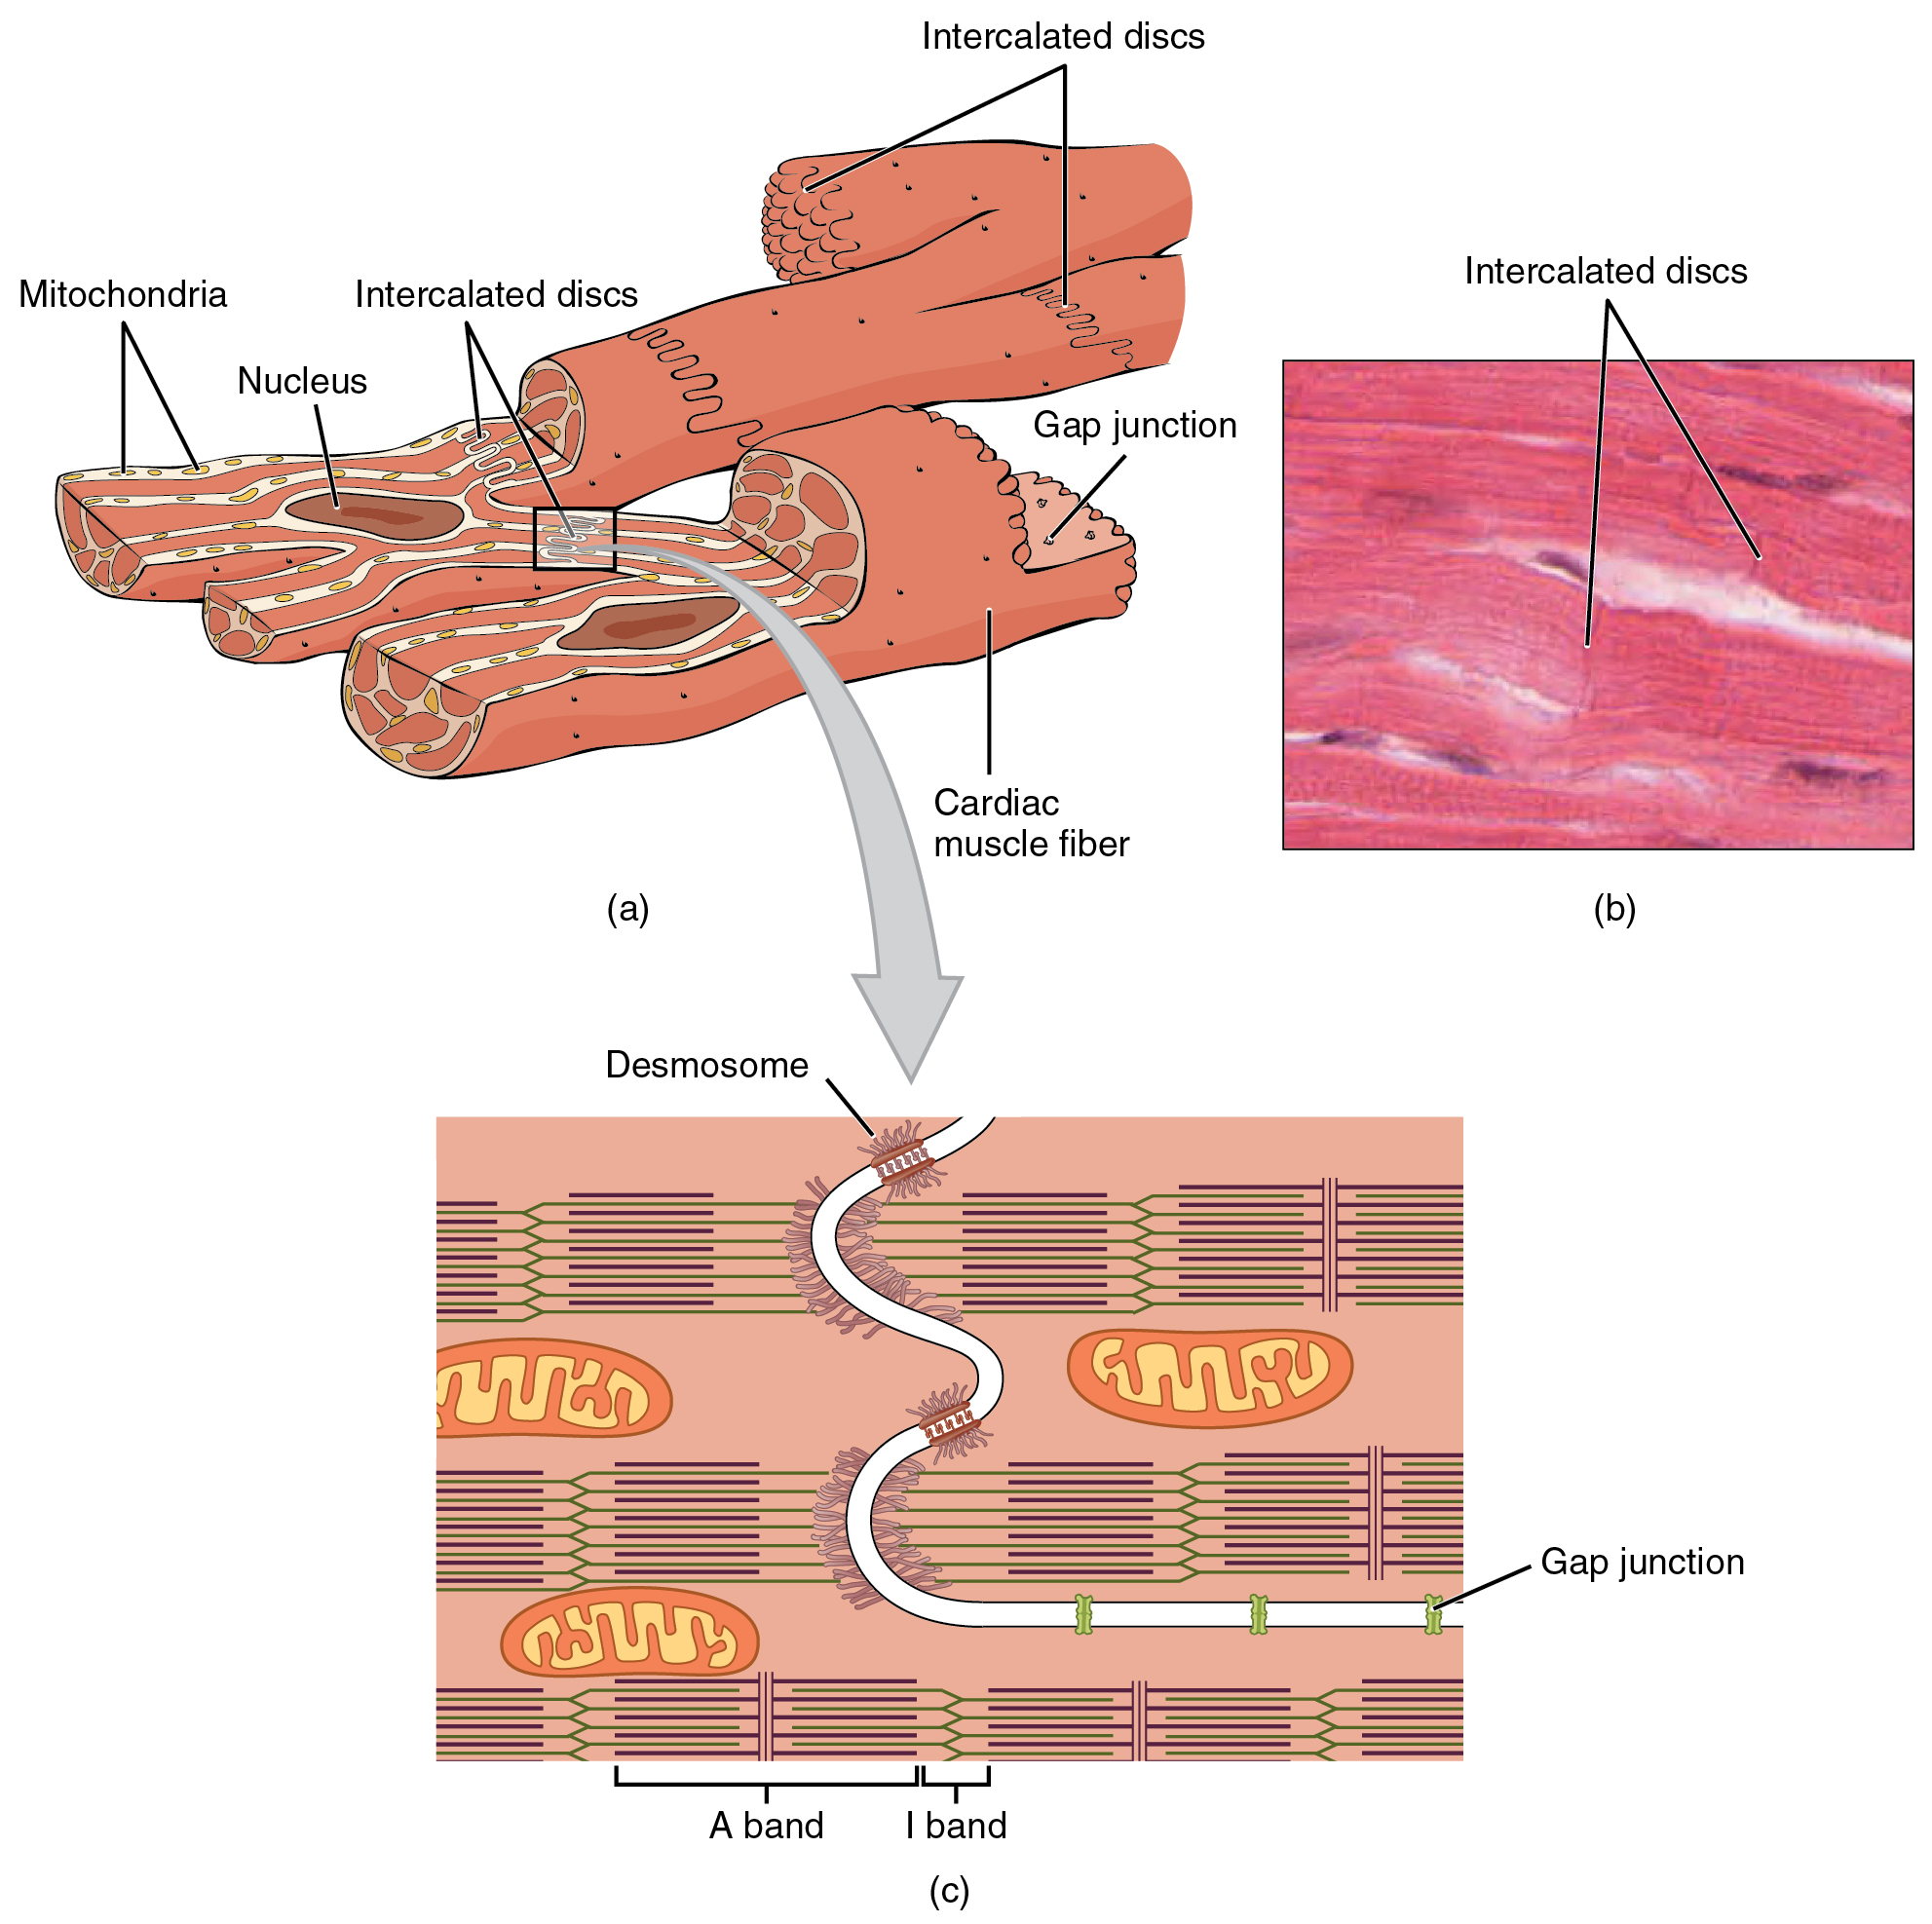 The top left panel of this figure shows the cross structure of cardiac muscle with the major parts labeled. The top right panel shows a micrograph of cardiac muscle. The bottom panel shows the structure of intercalated discs.